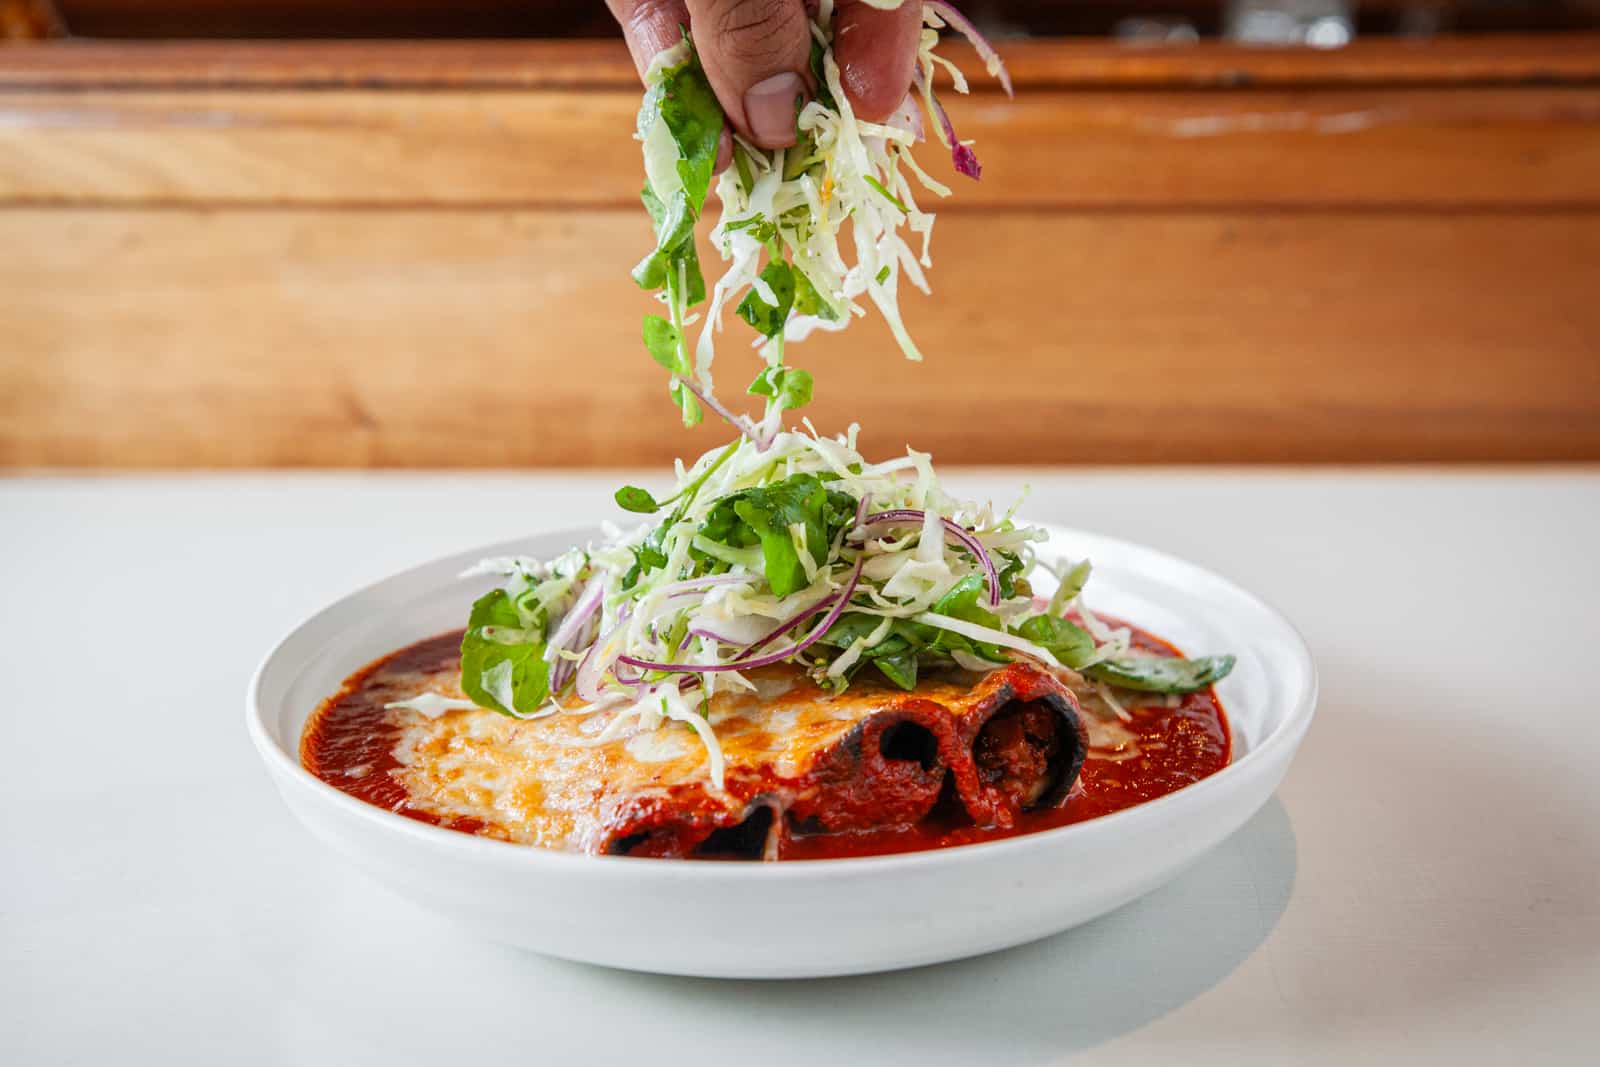 hands garnishing enchiladas in a red sauce with cabbage and micro greens